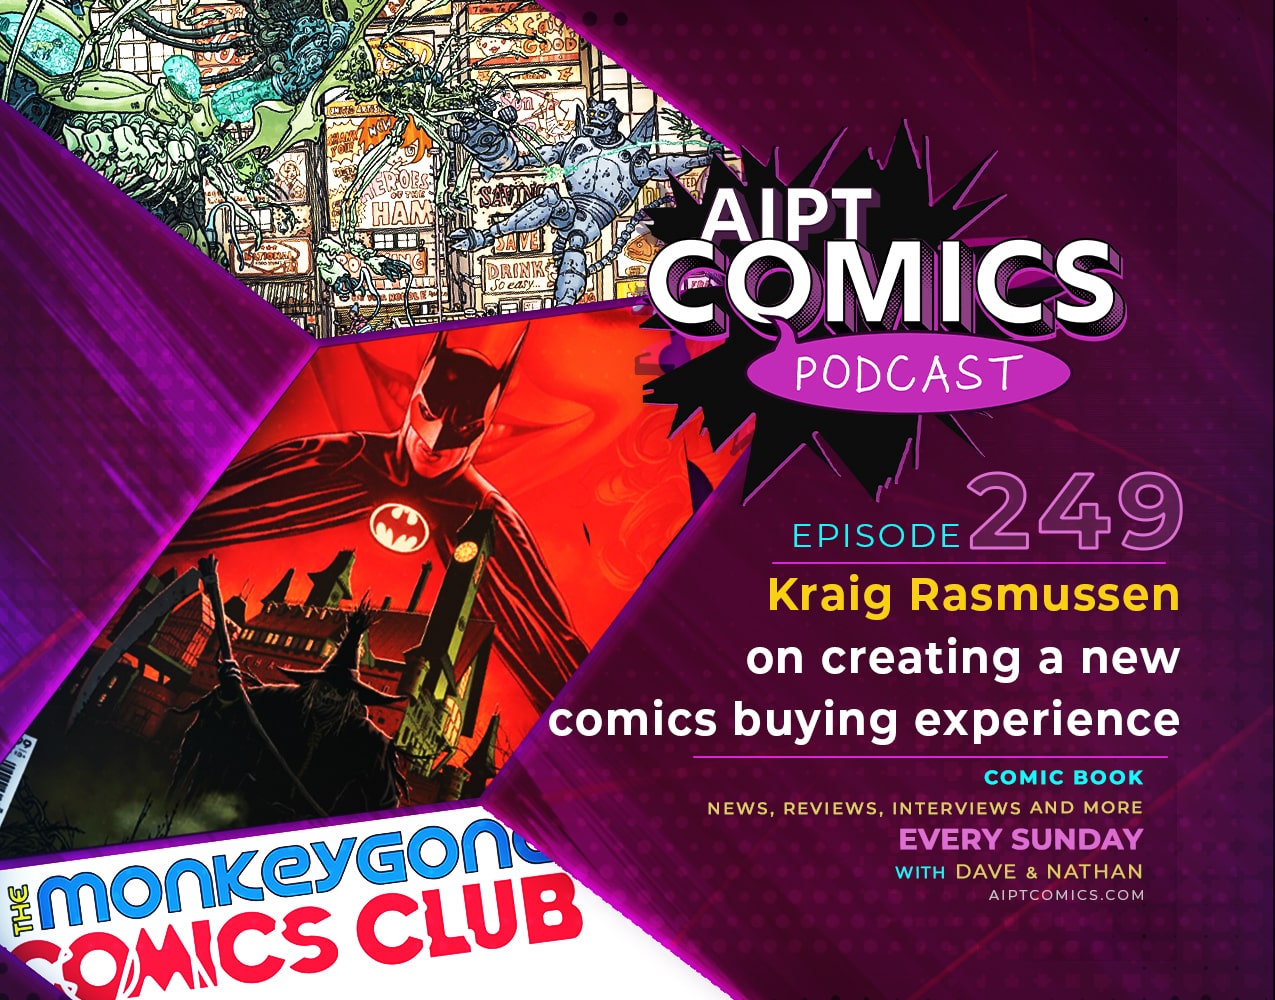 AIPT Comics Podcast Episode 249: Kraig Rasmussen on creating a new comics buying experience